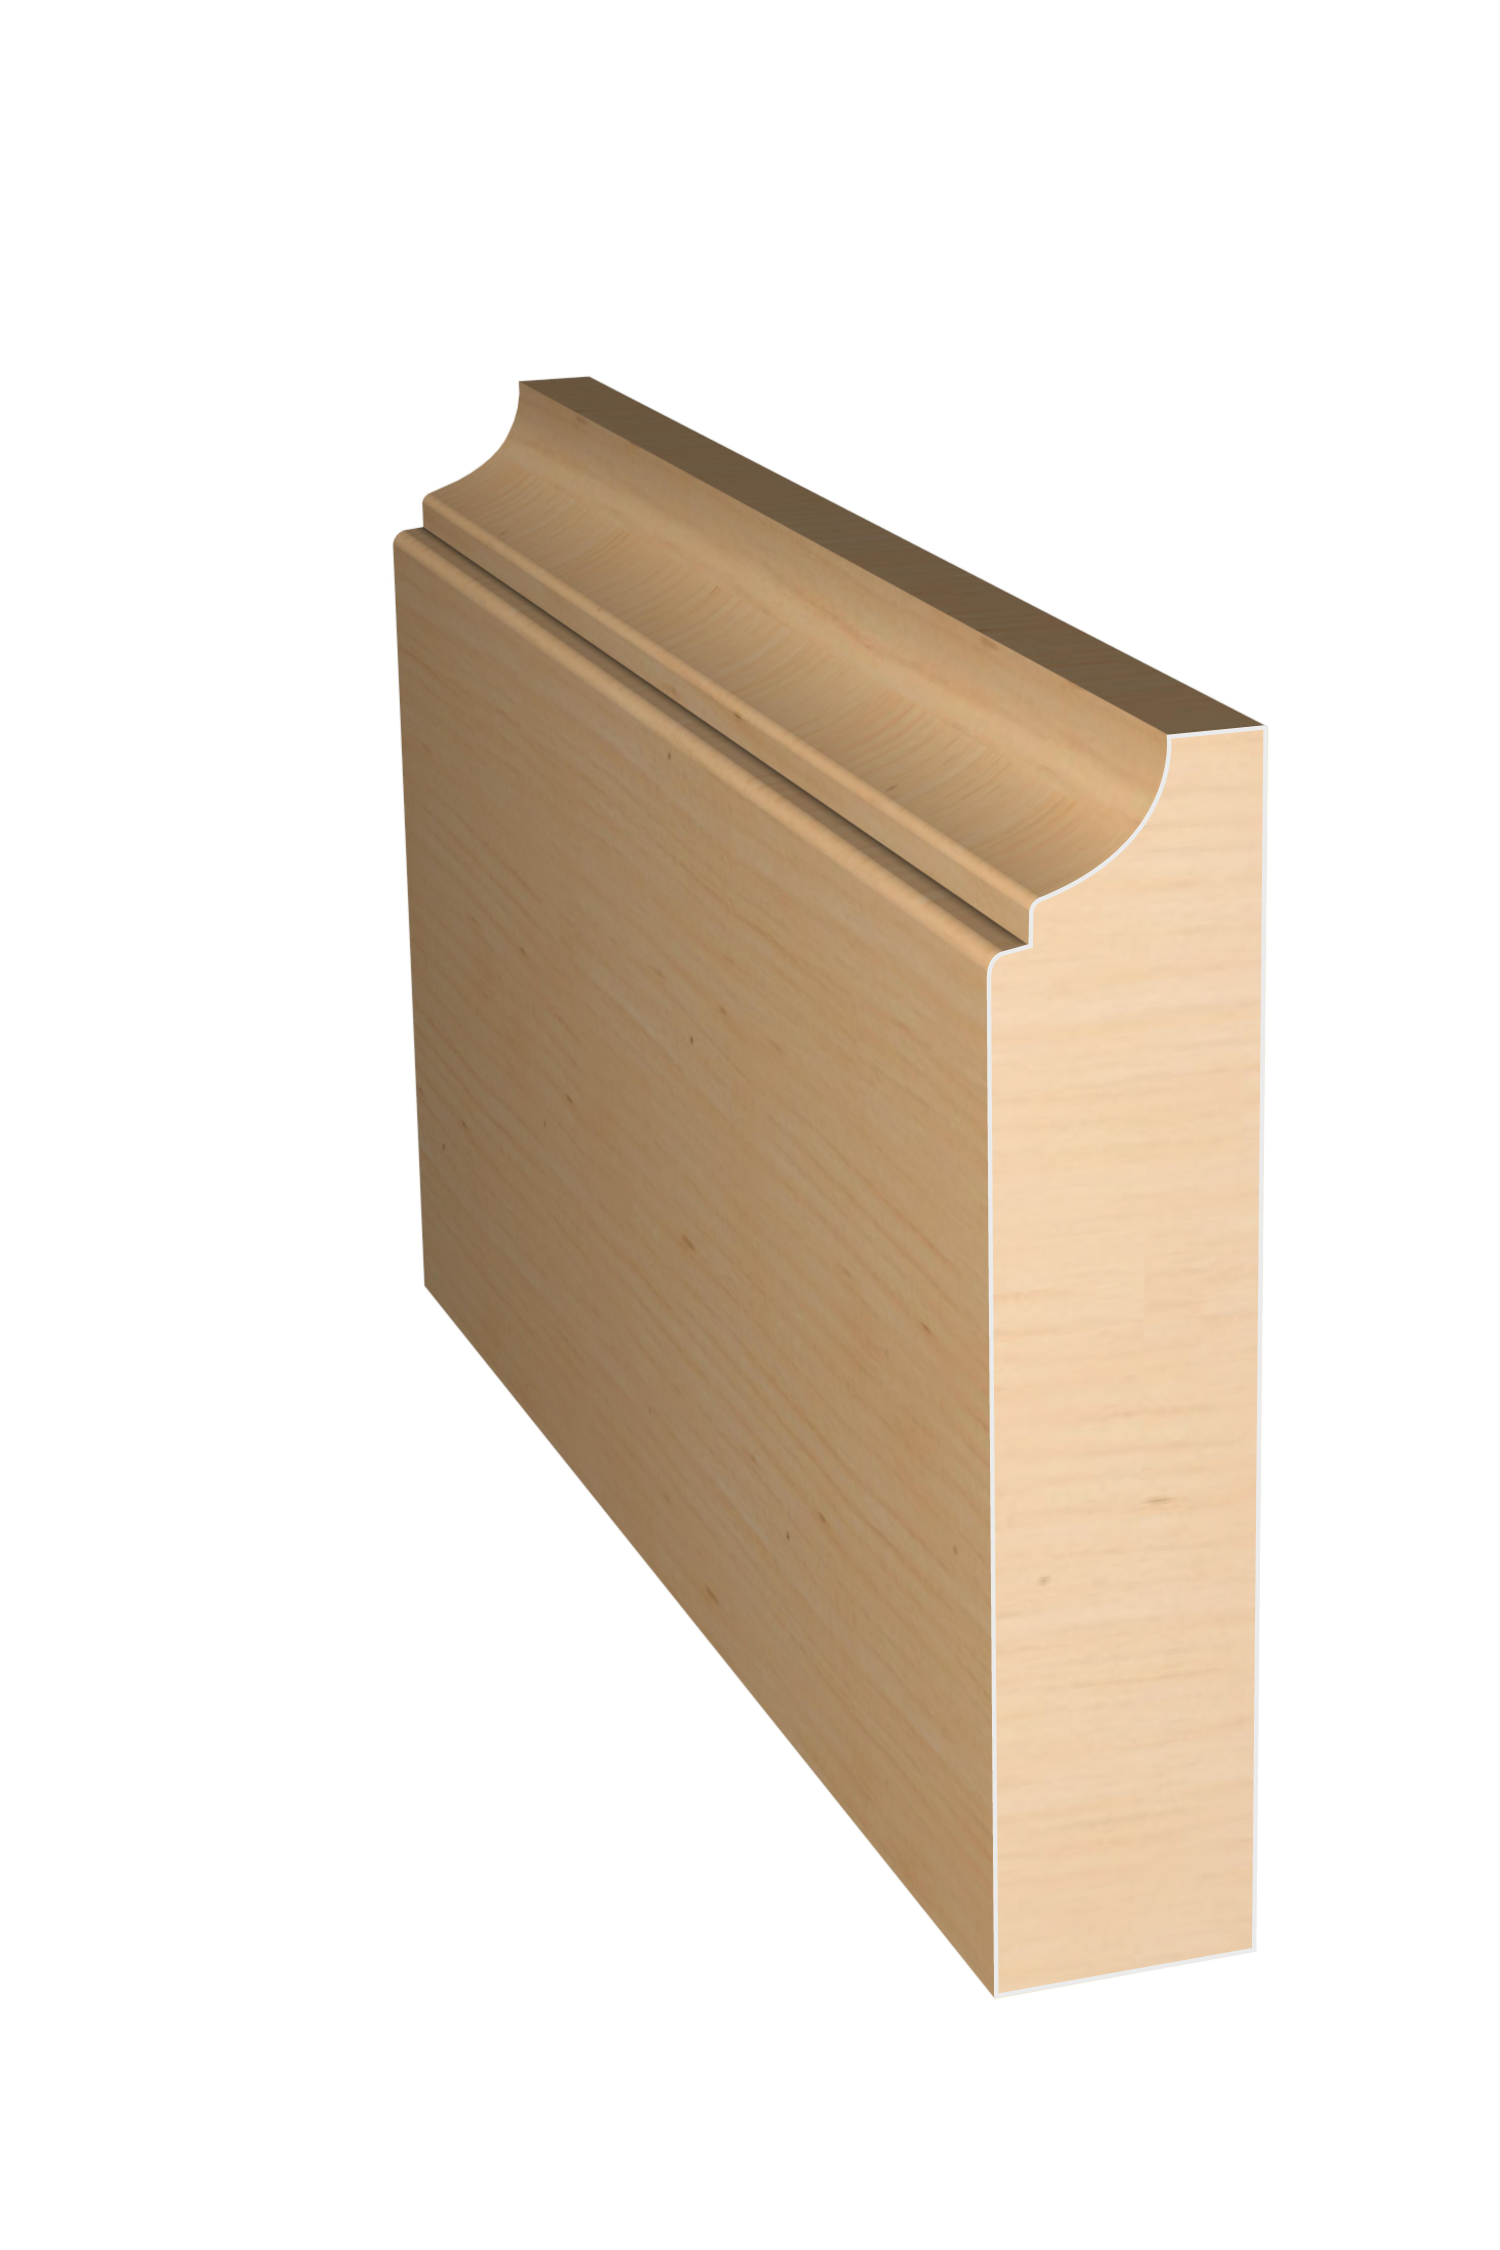 Three dimensional rendering of custom casing wood molding CAPL3381 made by Public Lumber Company in Detroit.